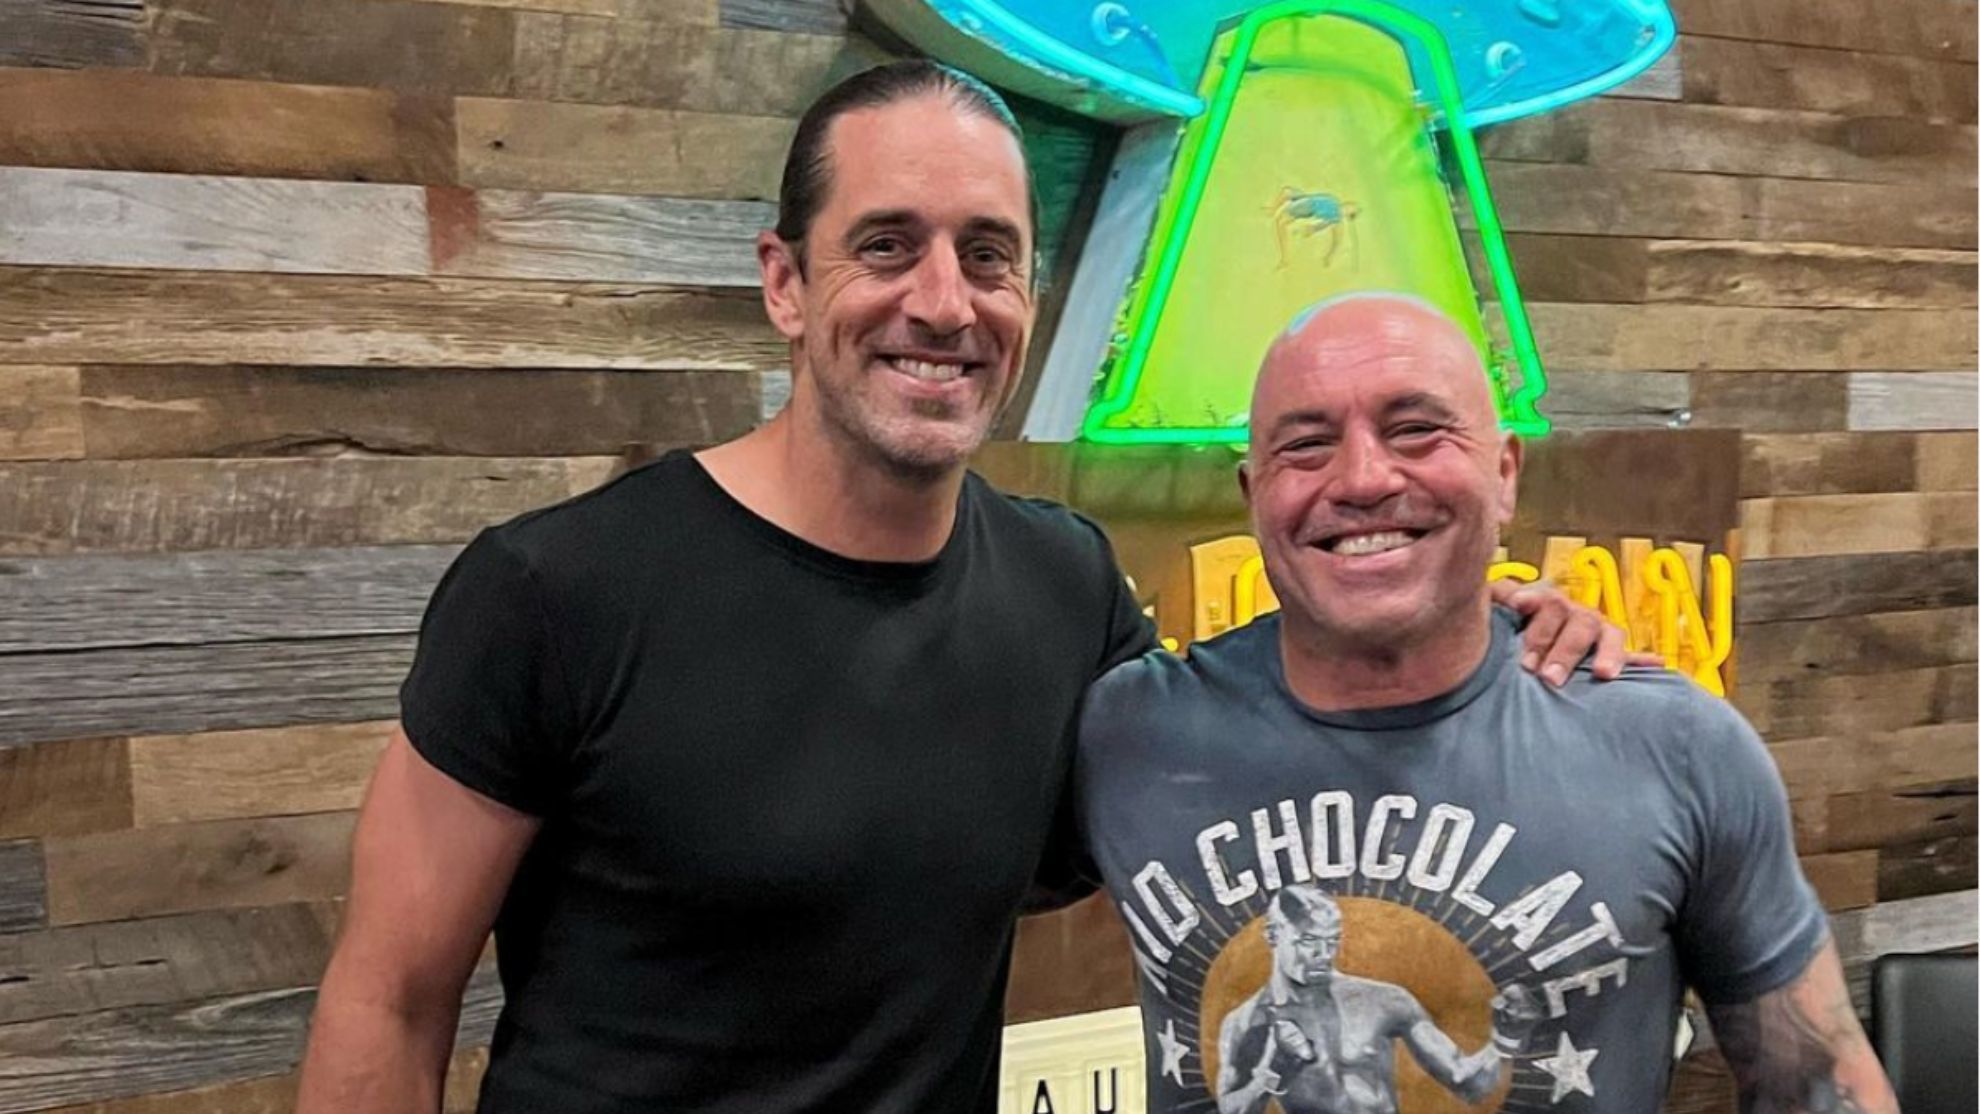 Rodgers is the latest guest on the popular podcast: 'The Joe Rogan Experience'. IG/@joerogan